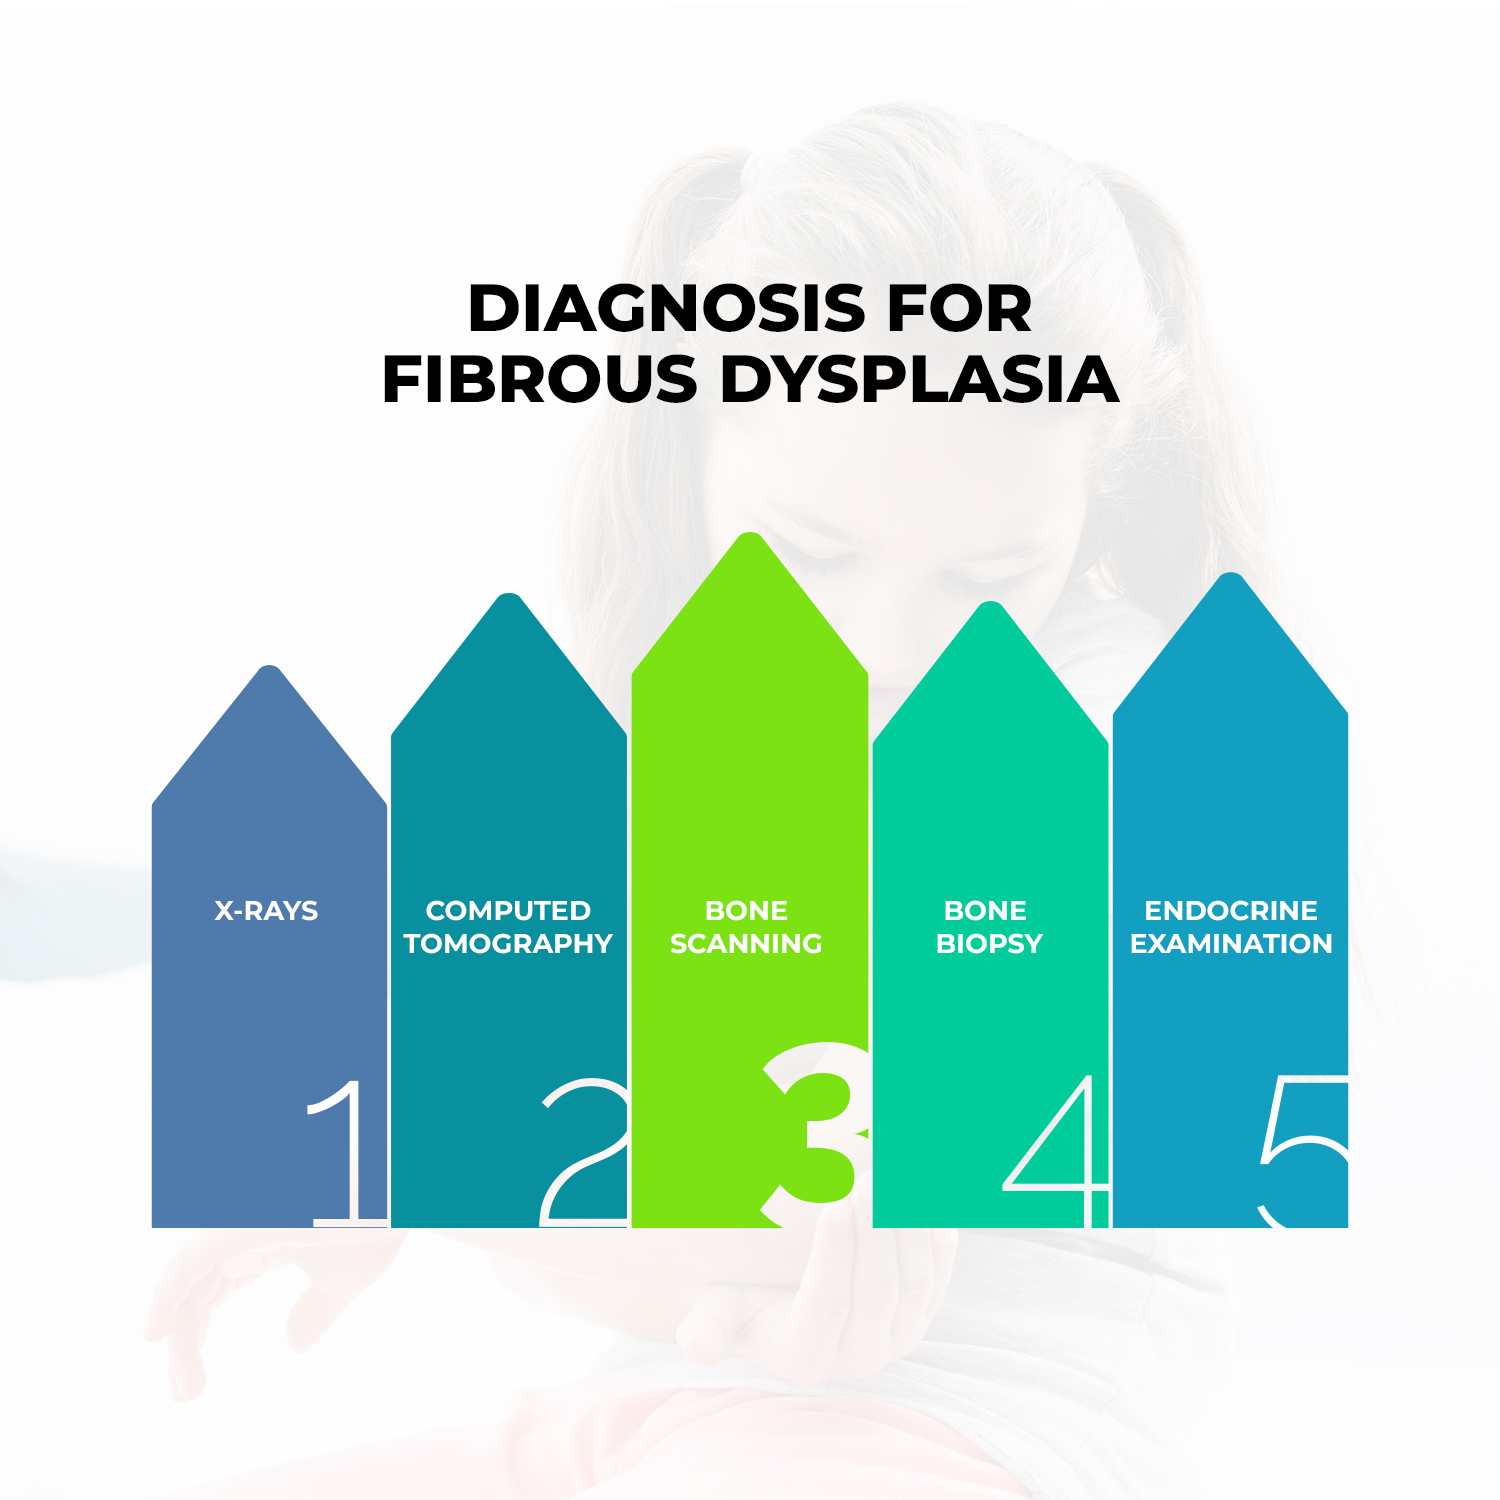 How Is Fibrous Dysplasia Diagnosed